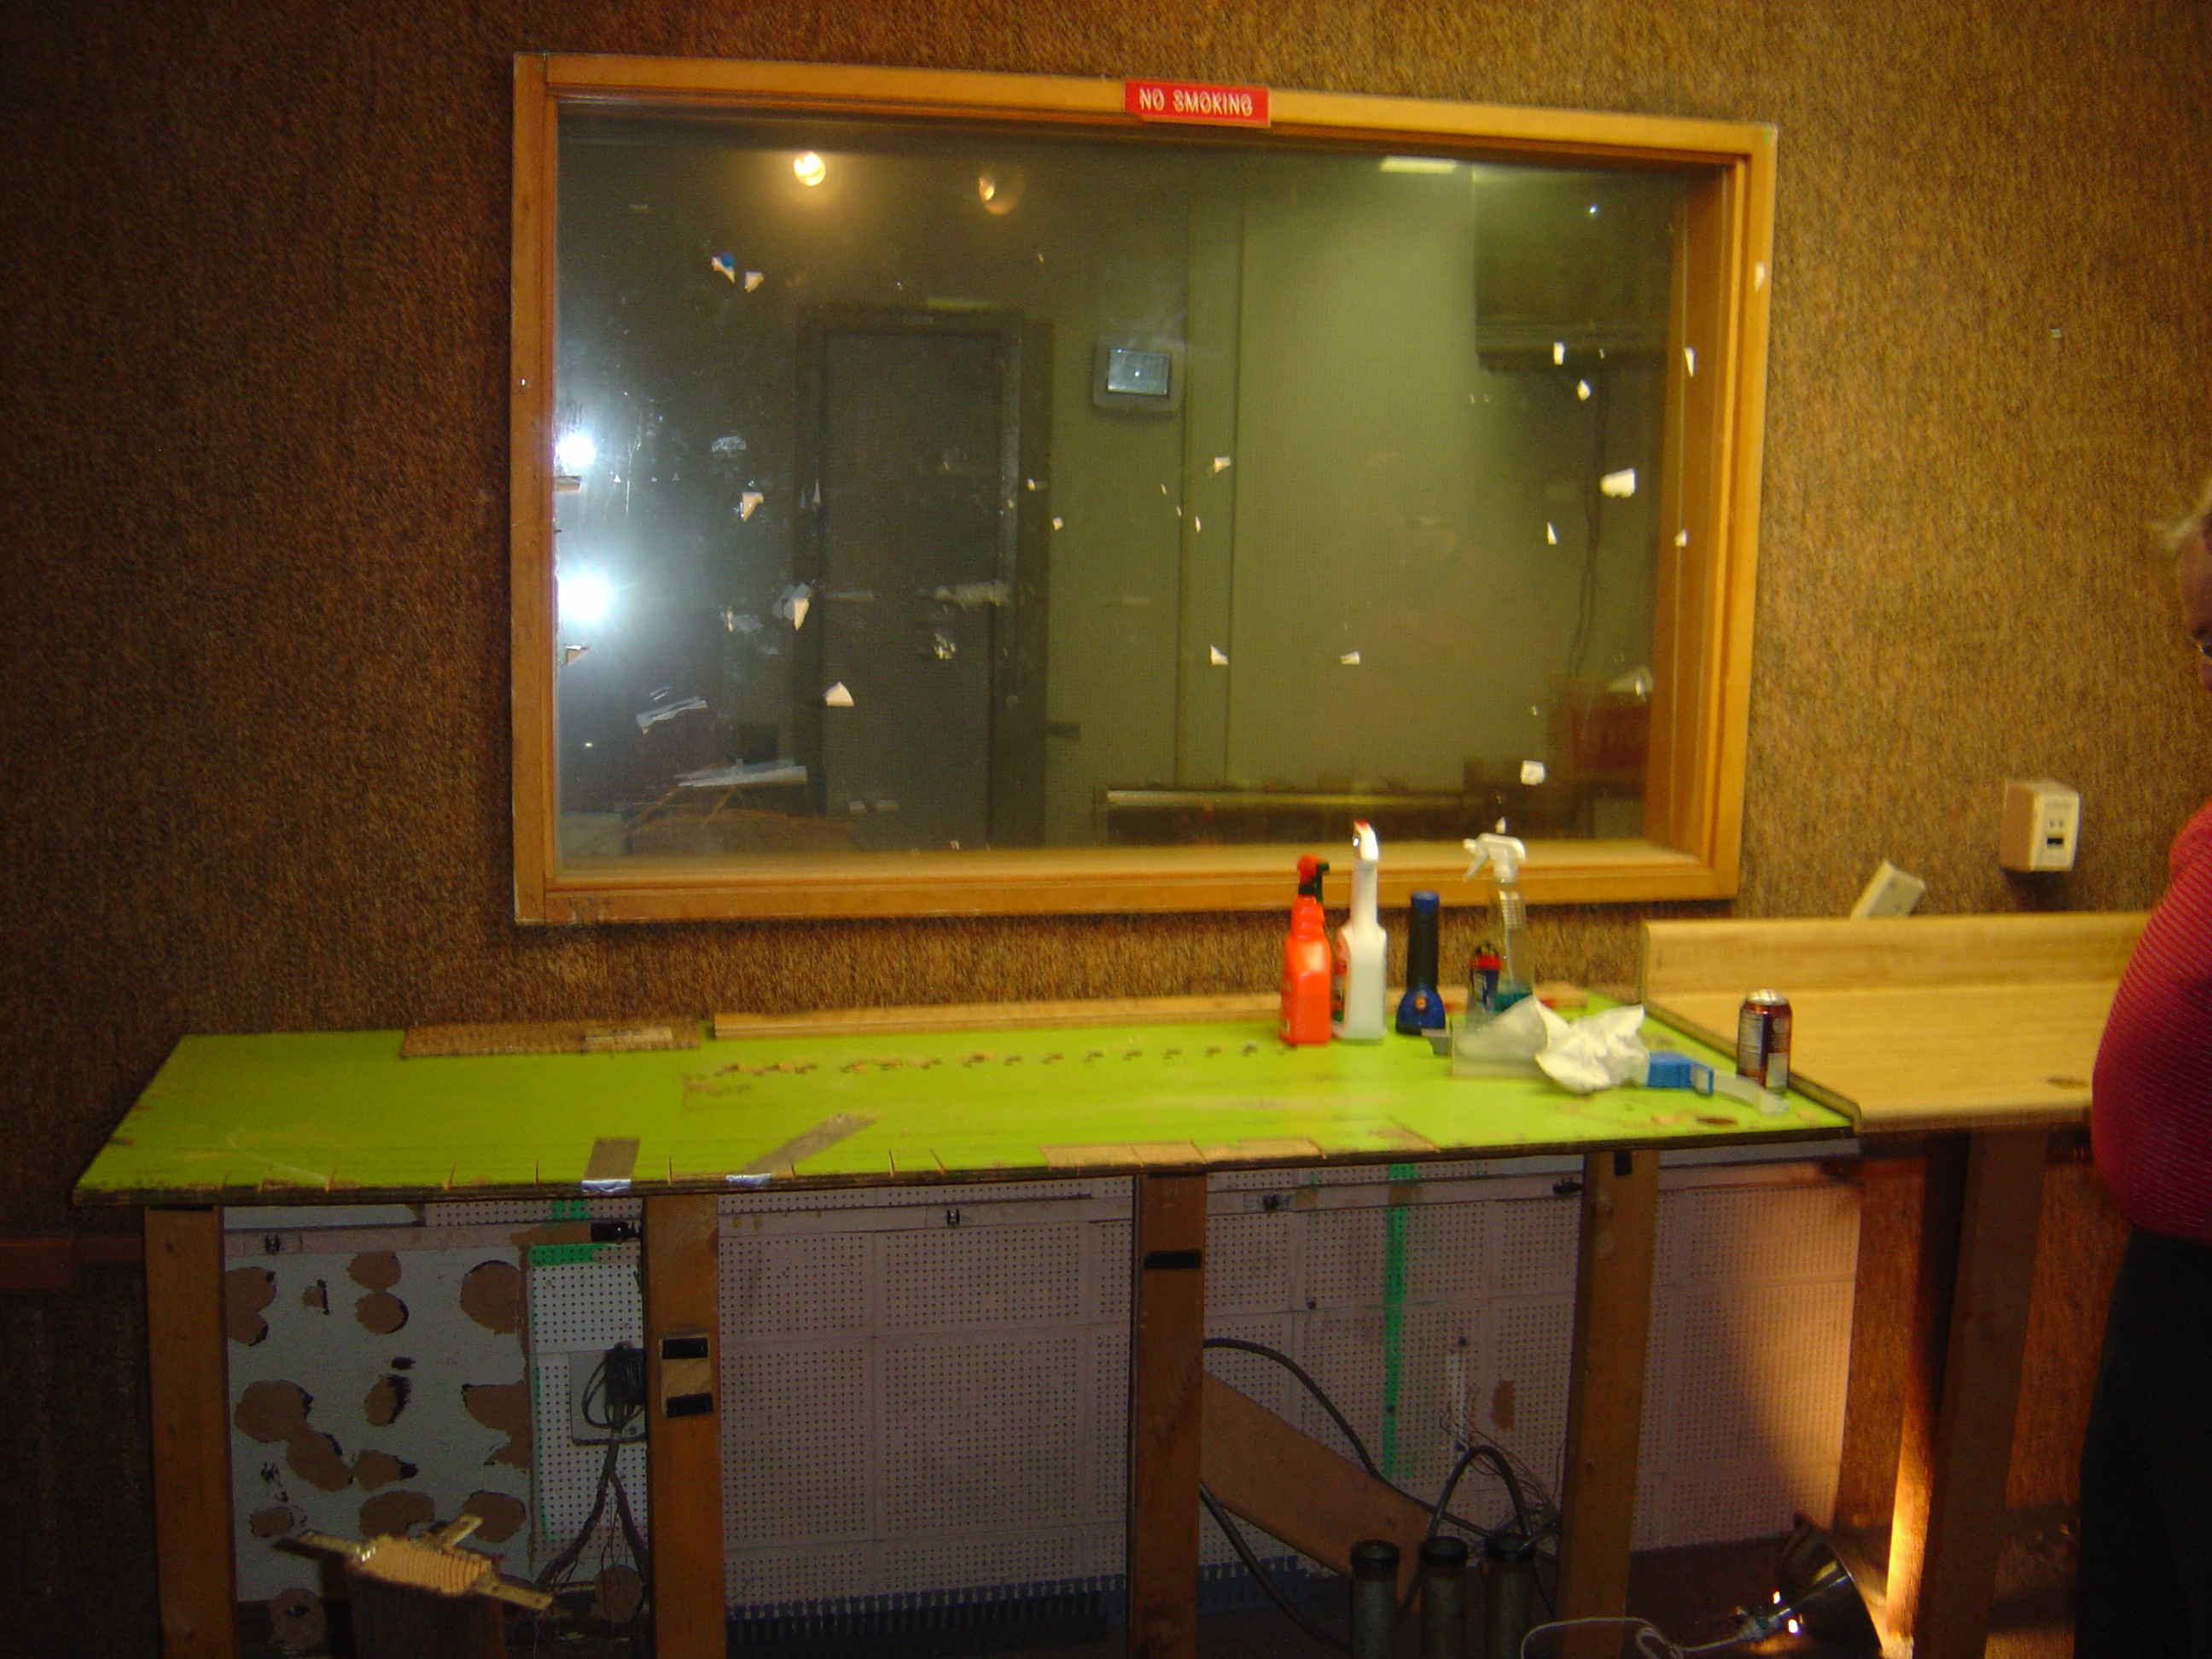 FM - Yes the room was green once. Including the walls. Looking under the table for the remaining green paint.